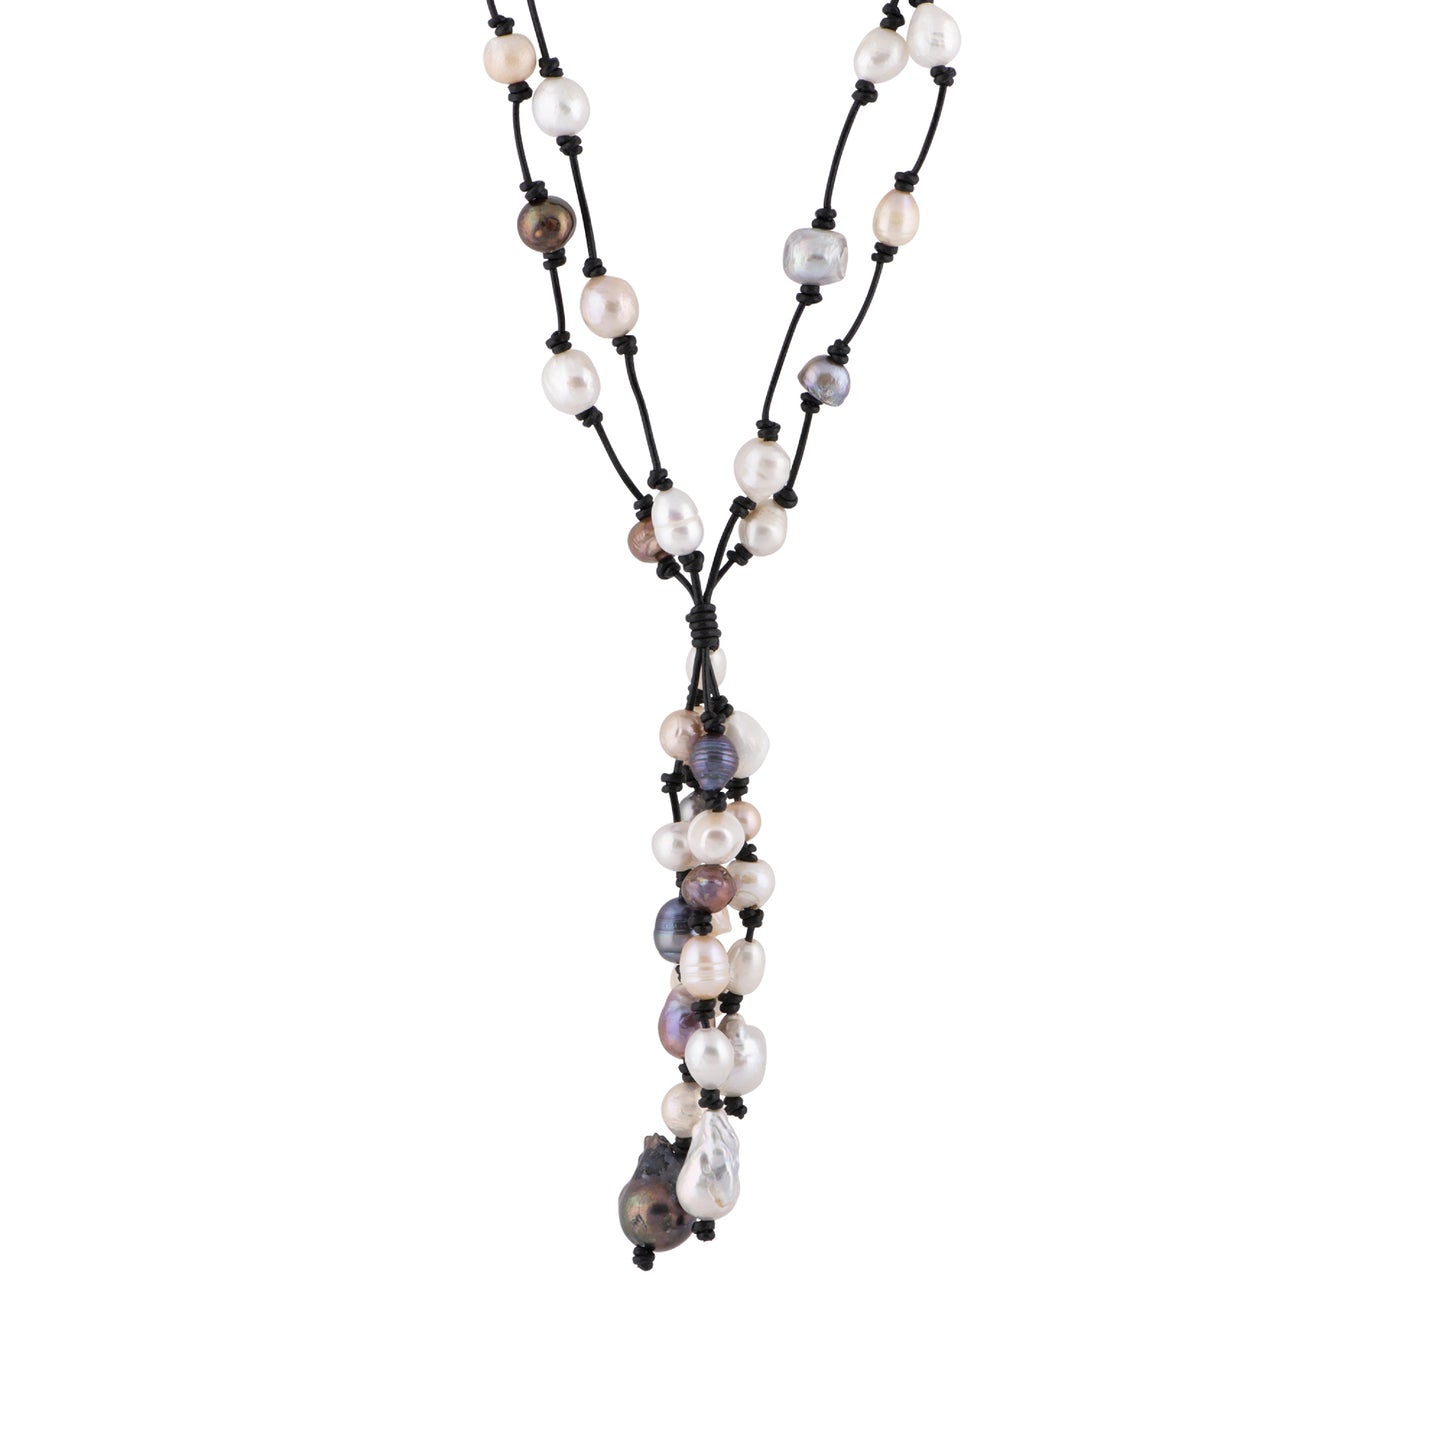 Rachel - Freshwater pearl and leather necklace (Black leather, multicolor pearls)